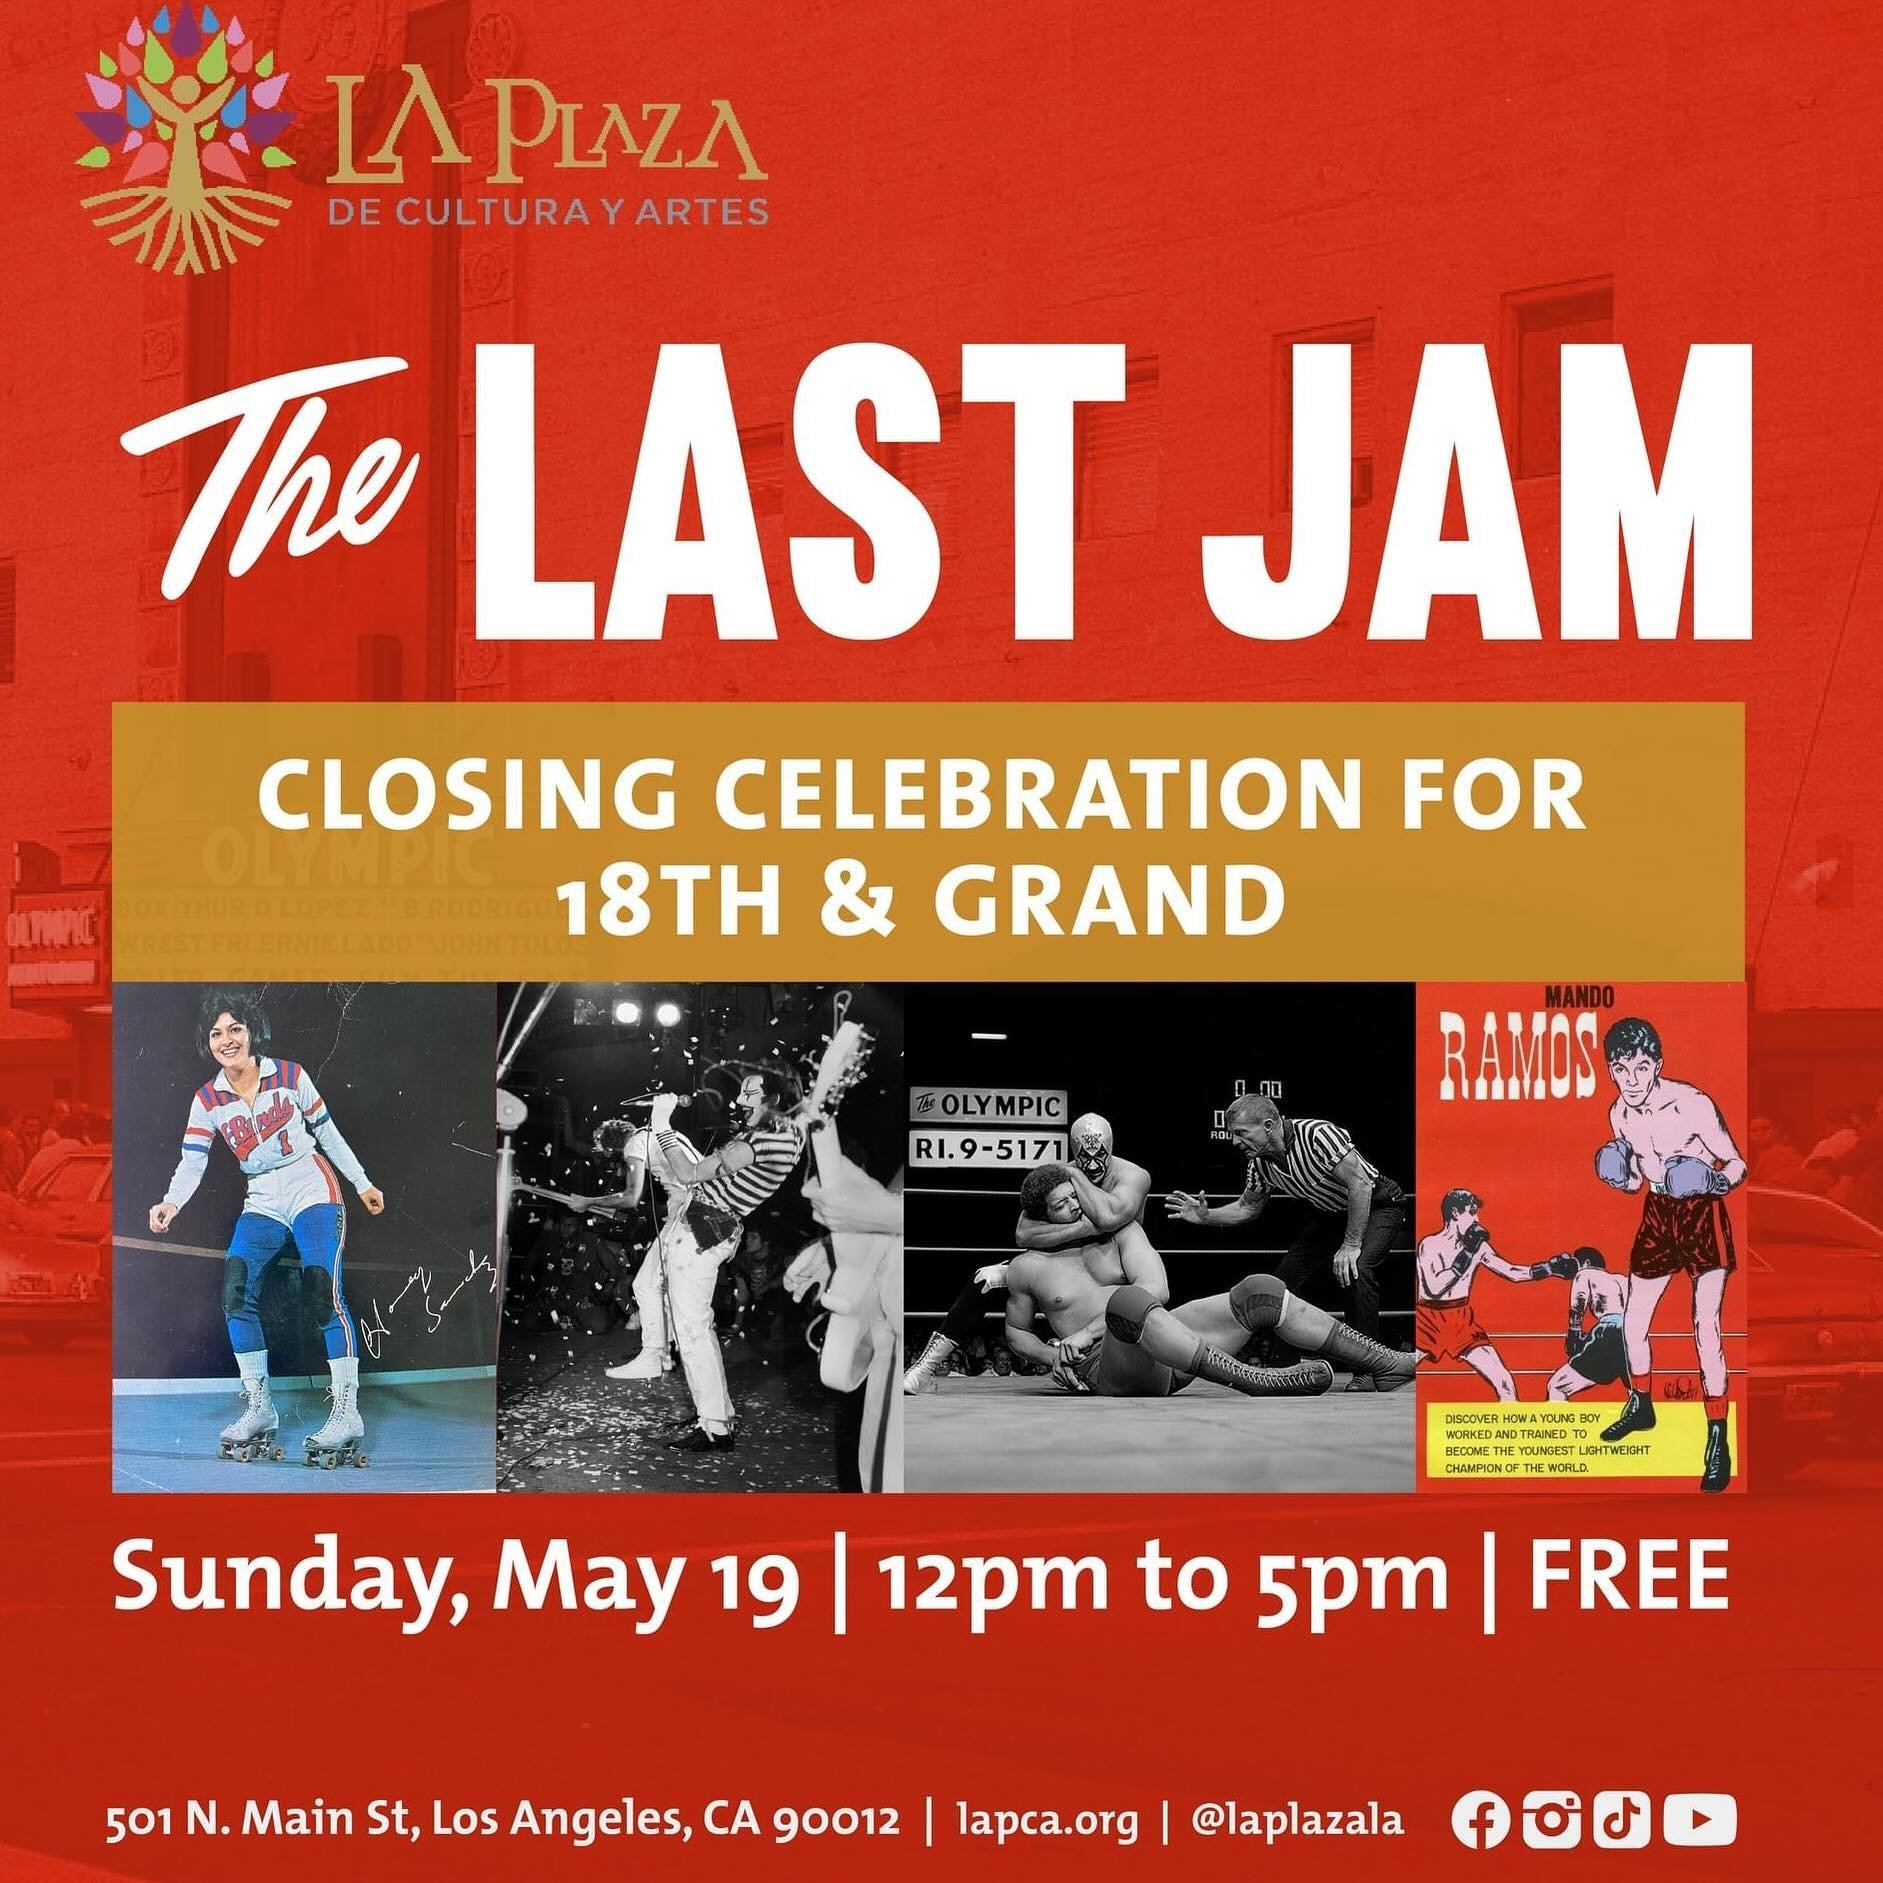 Folks, our friends and collaborators at @laplazala are putting together a final weekend to remember. On Saturday there will be a tour of the show followed by a bike ride to the Olympic (more to come on that). And on Sunday, the final day of the exhib